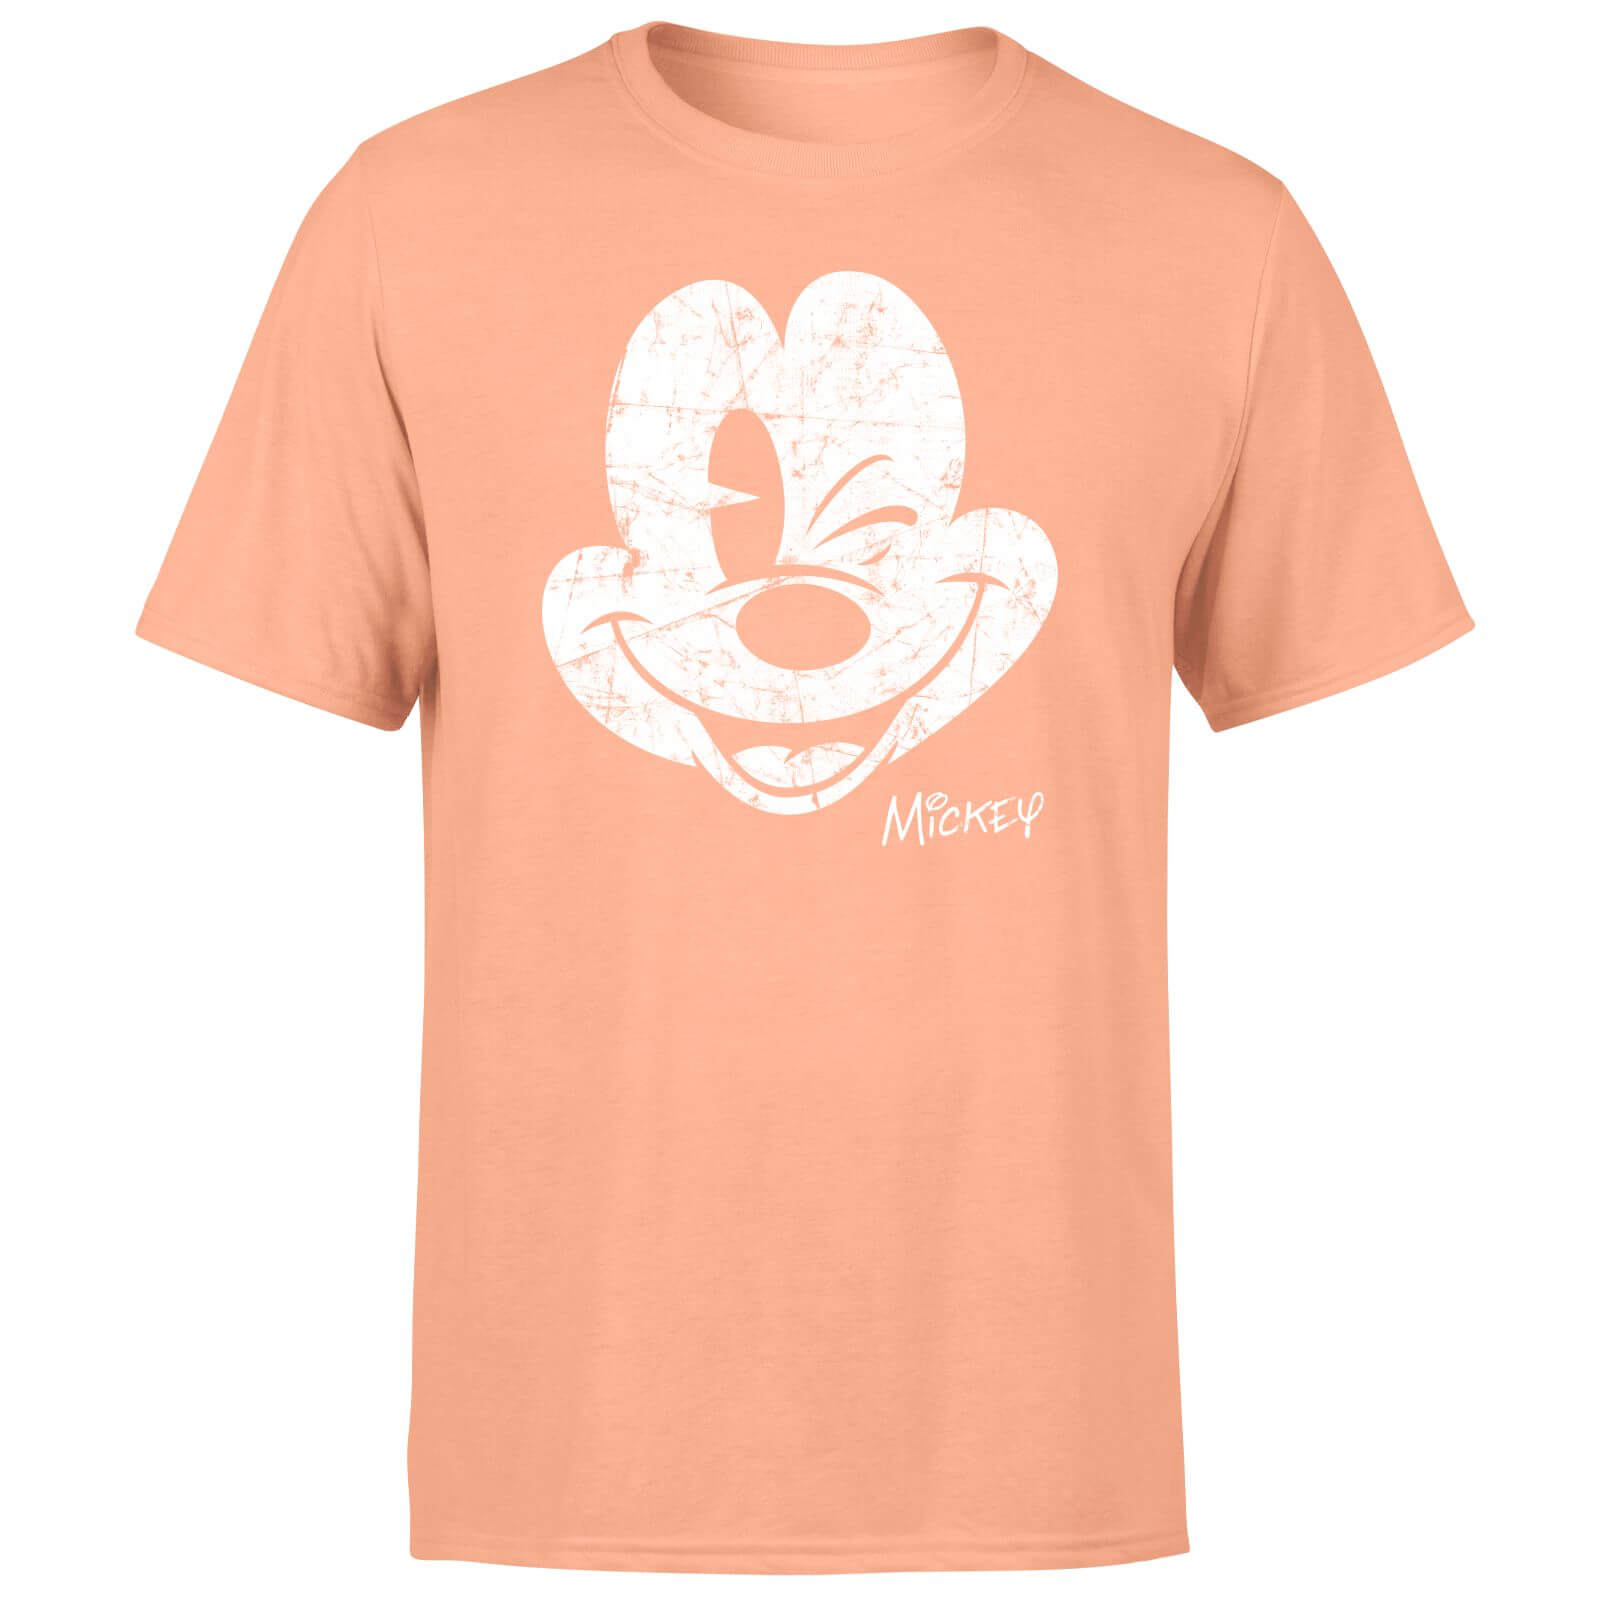 Mickey Mouse Worn Face Men's T-Shirt - Coral - XXL - Coral Rewards - Monetha